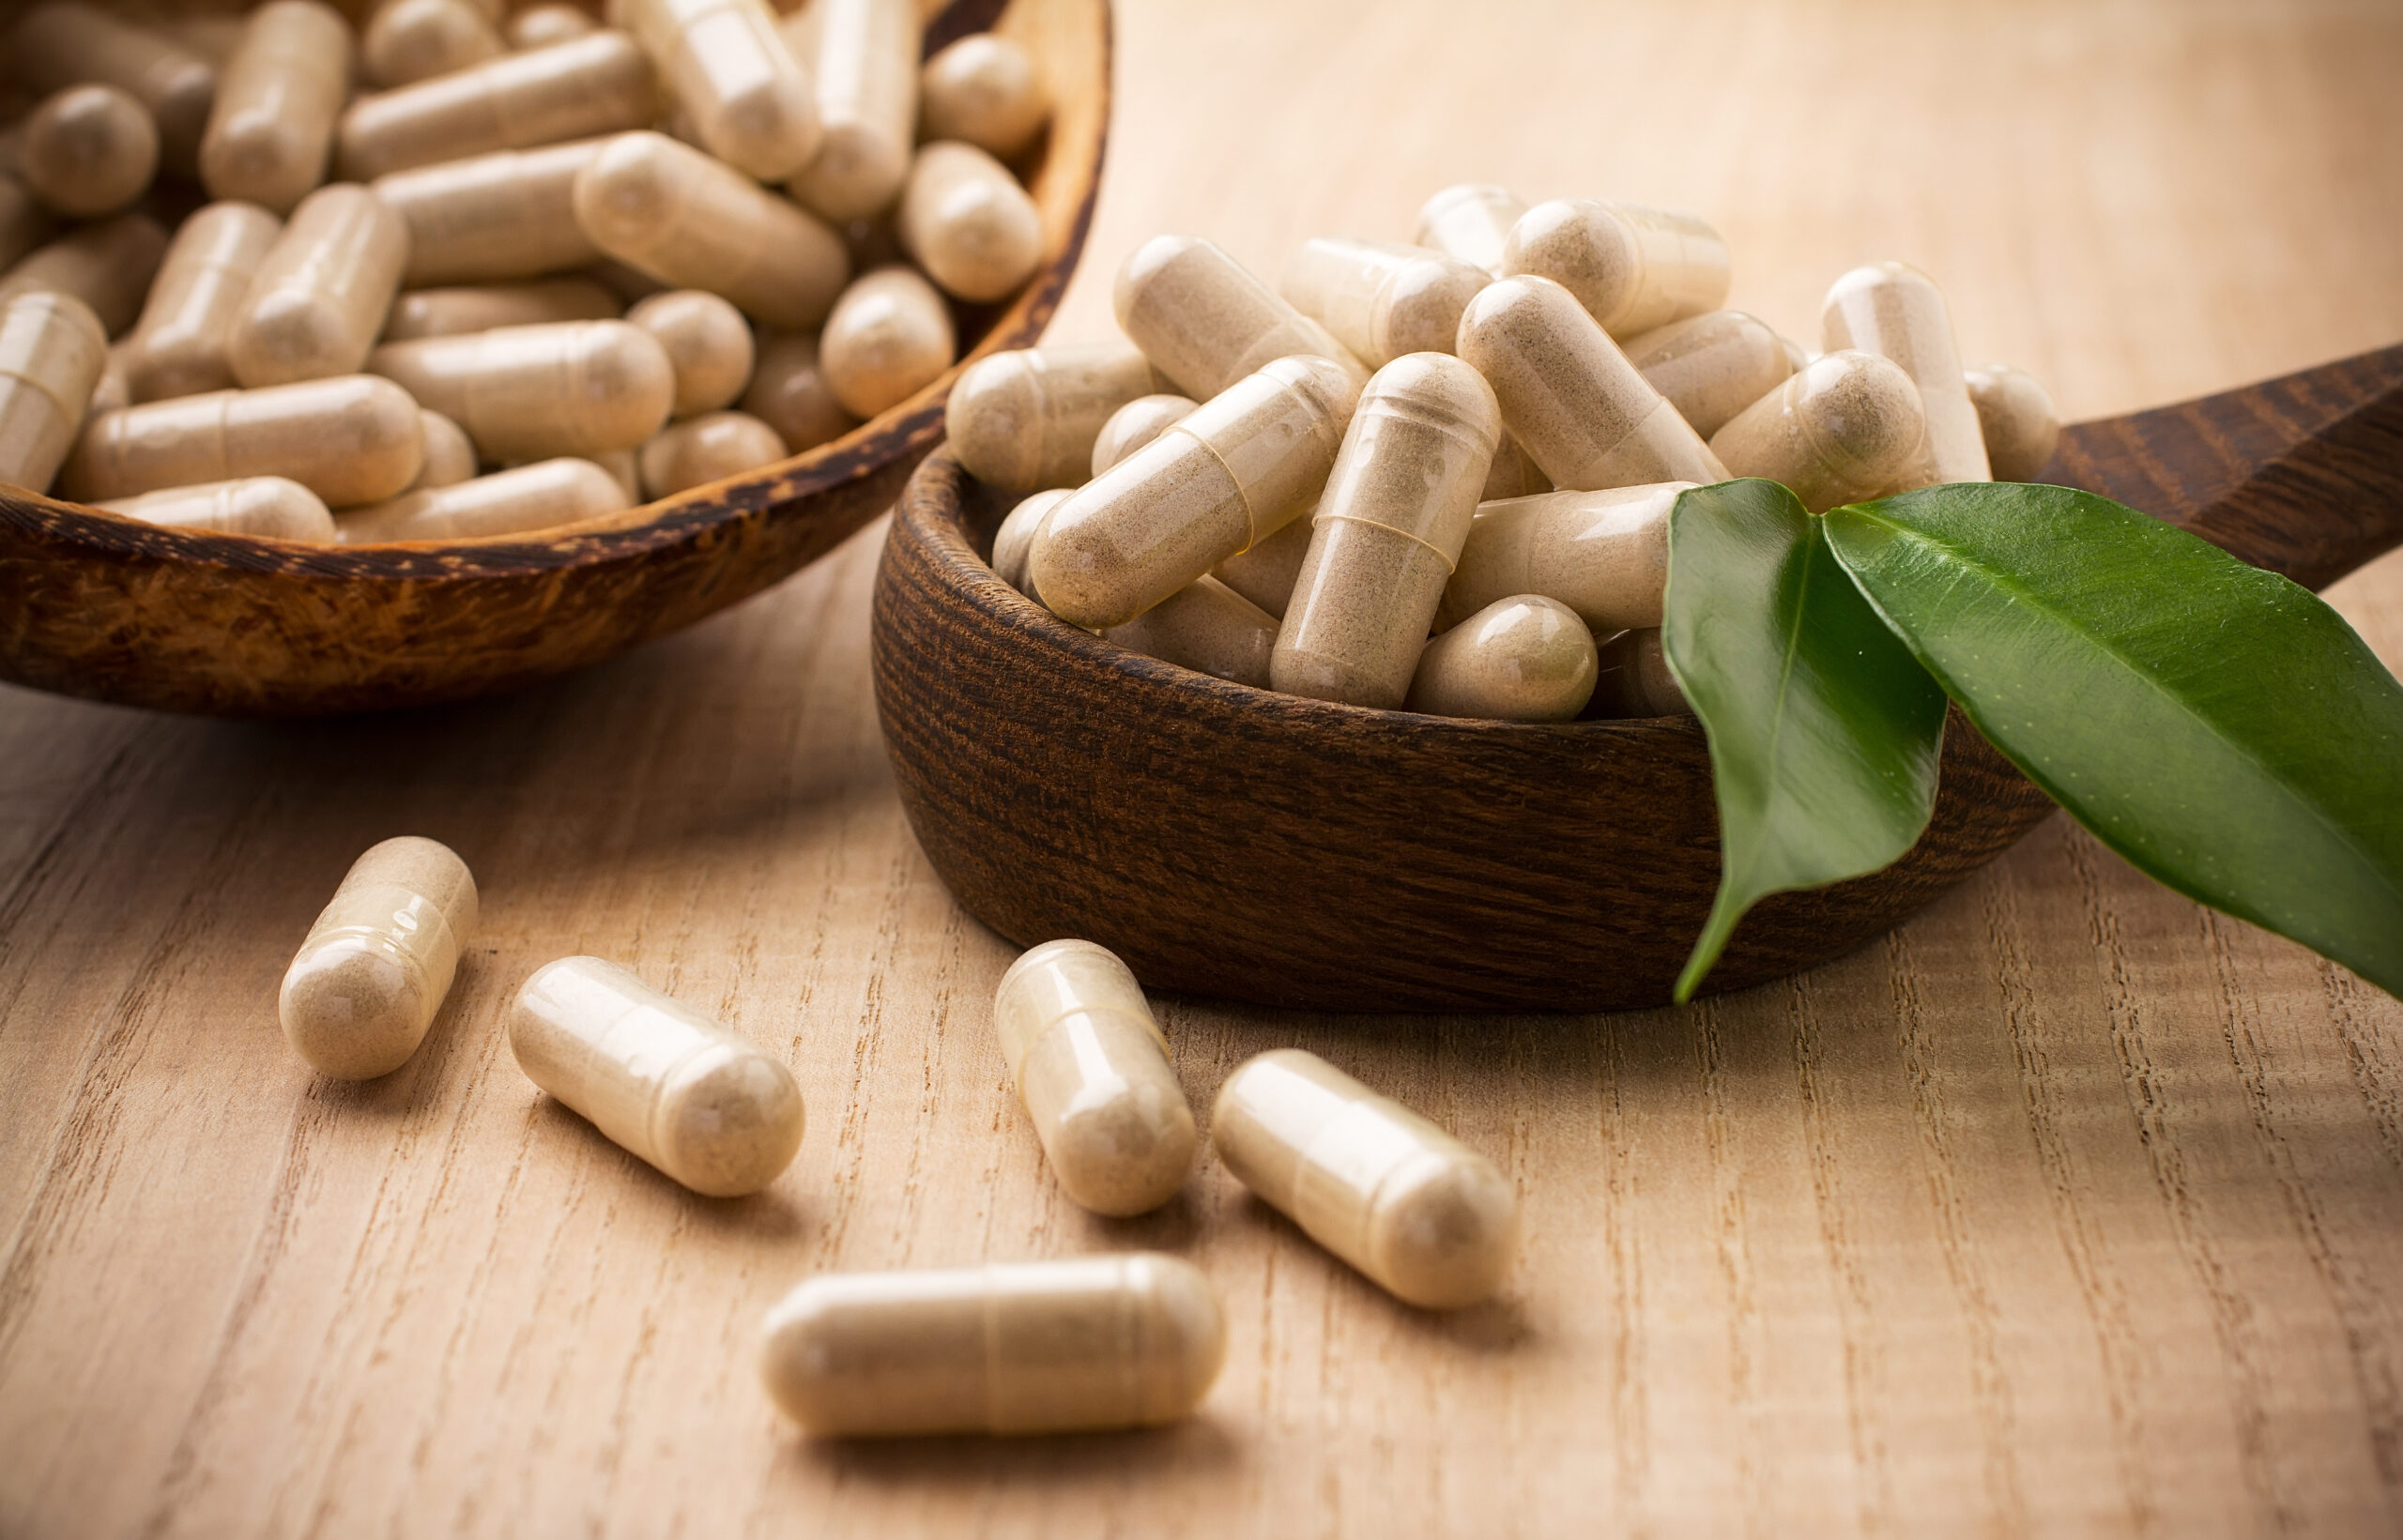 Know this before buying supplements